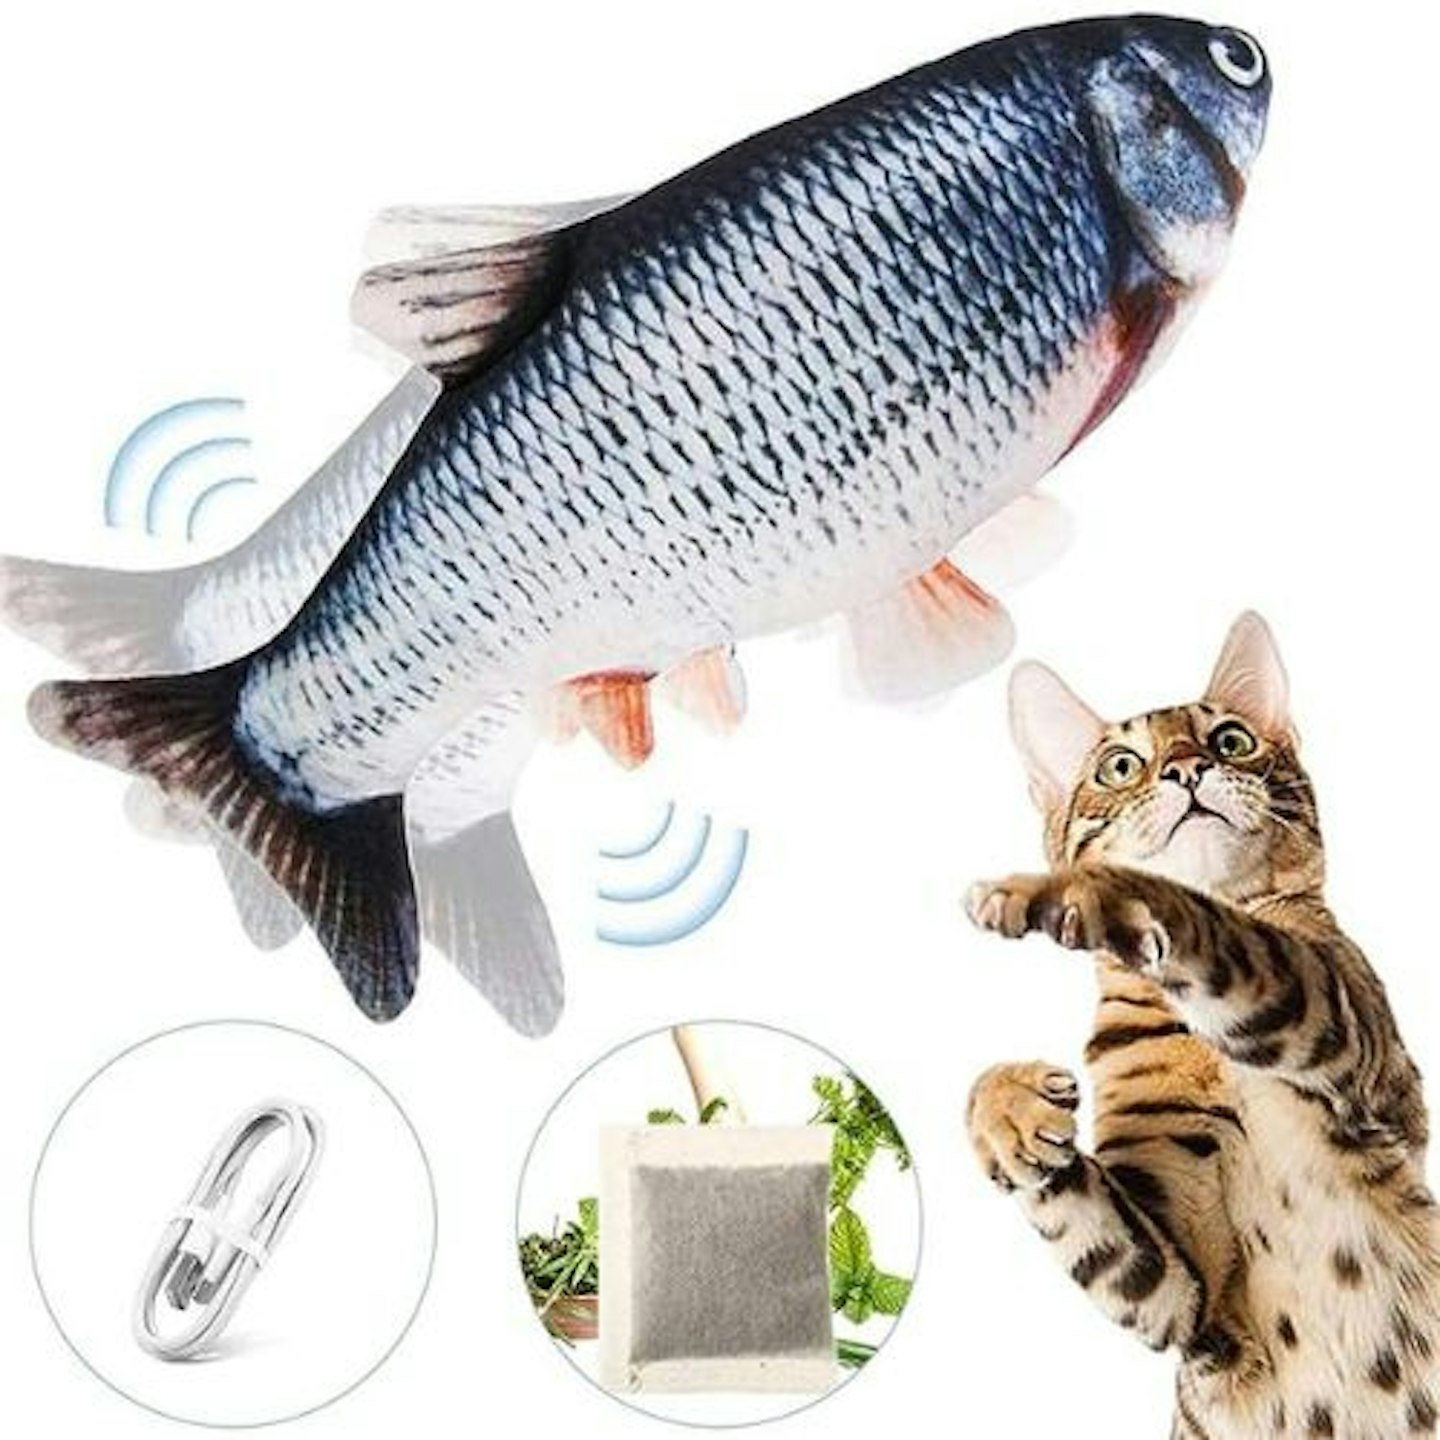 IOKHEIRA Interactive Cat Toy, Cat Toys for Indoor Cats Interactive